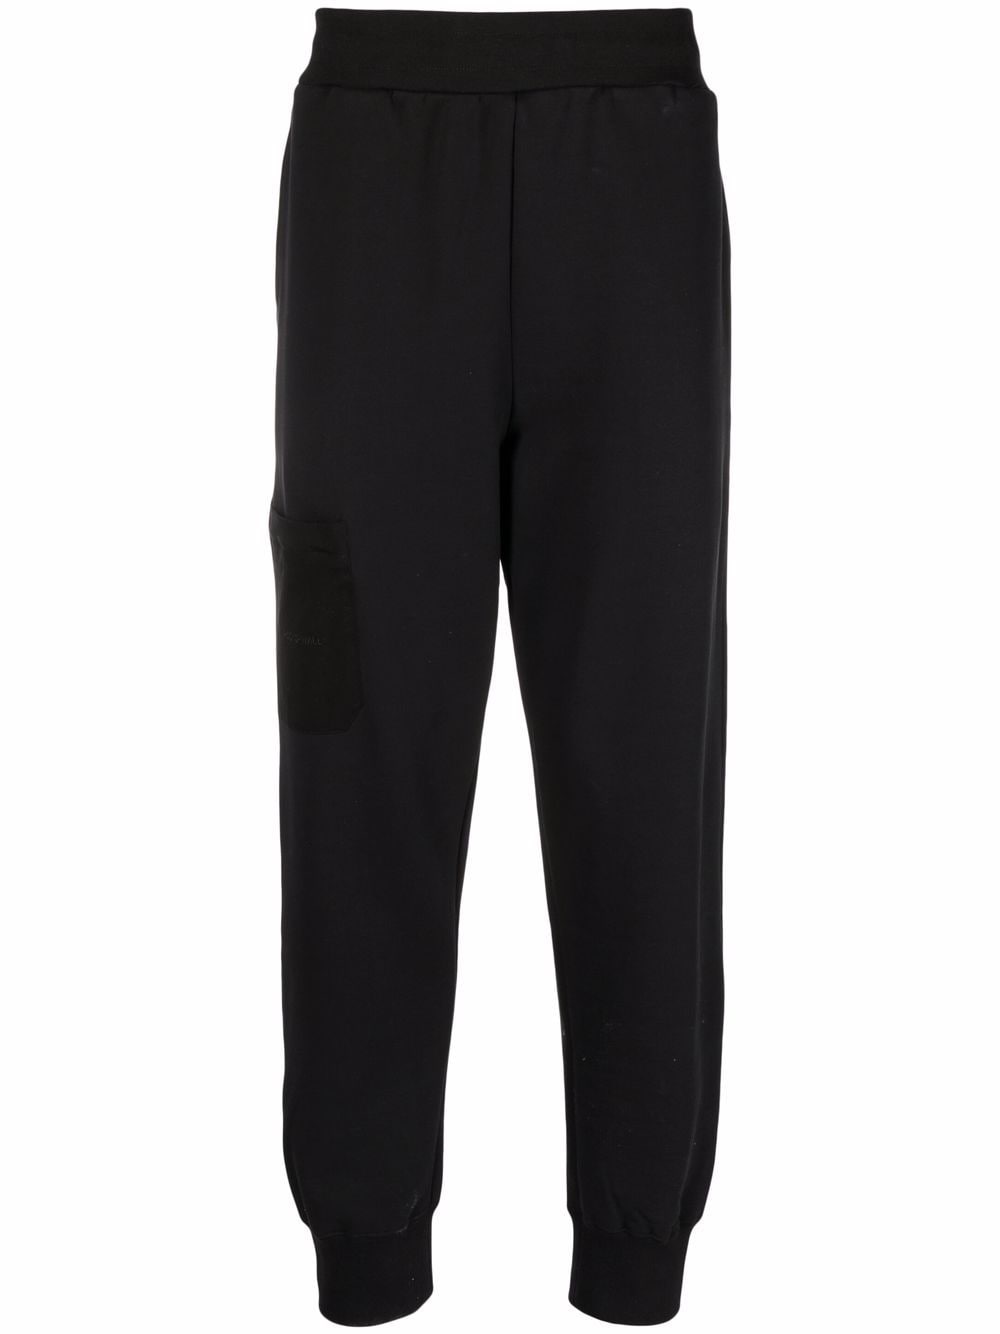 A-COLD-WALL* logo tracksuit bottoms - Black von A-COLD-WALL*